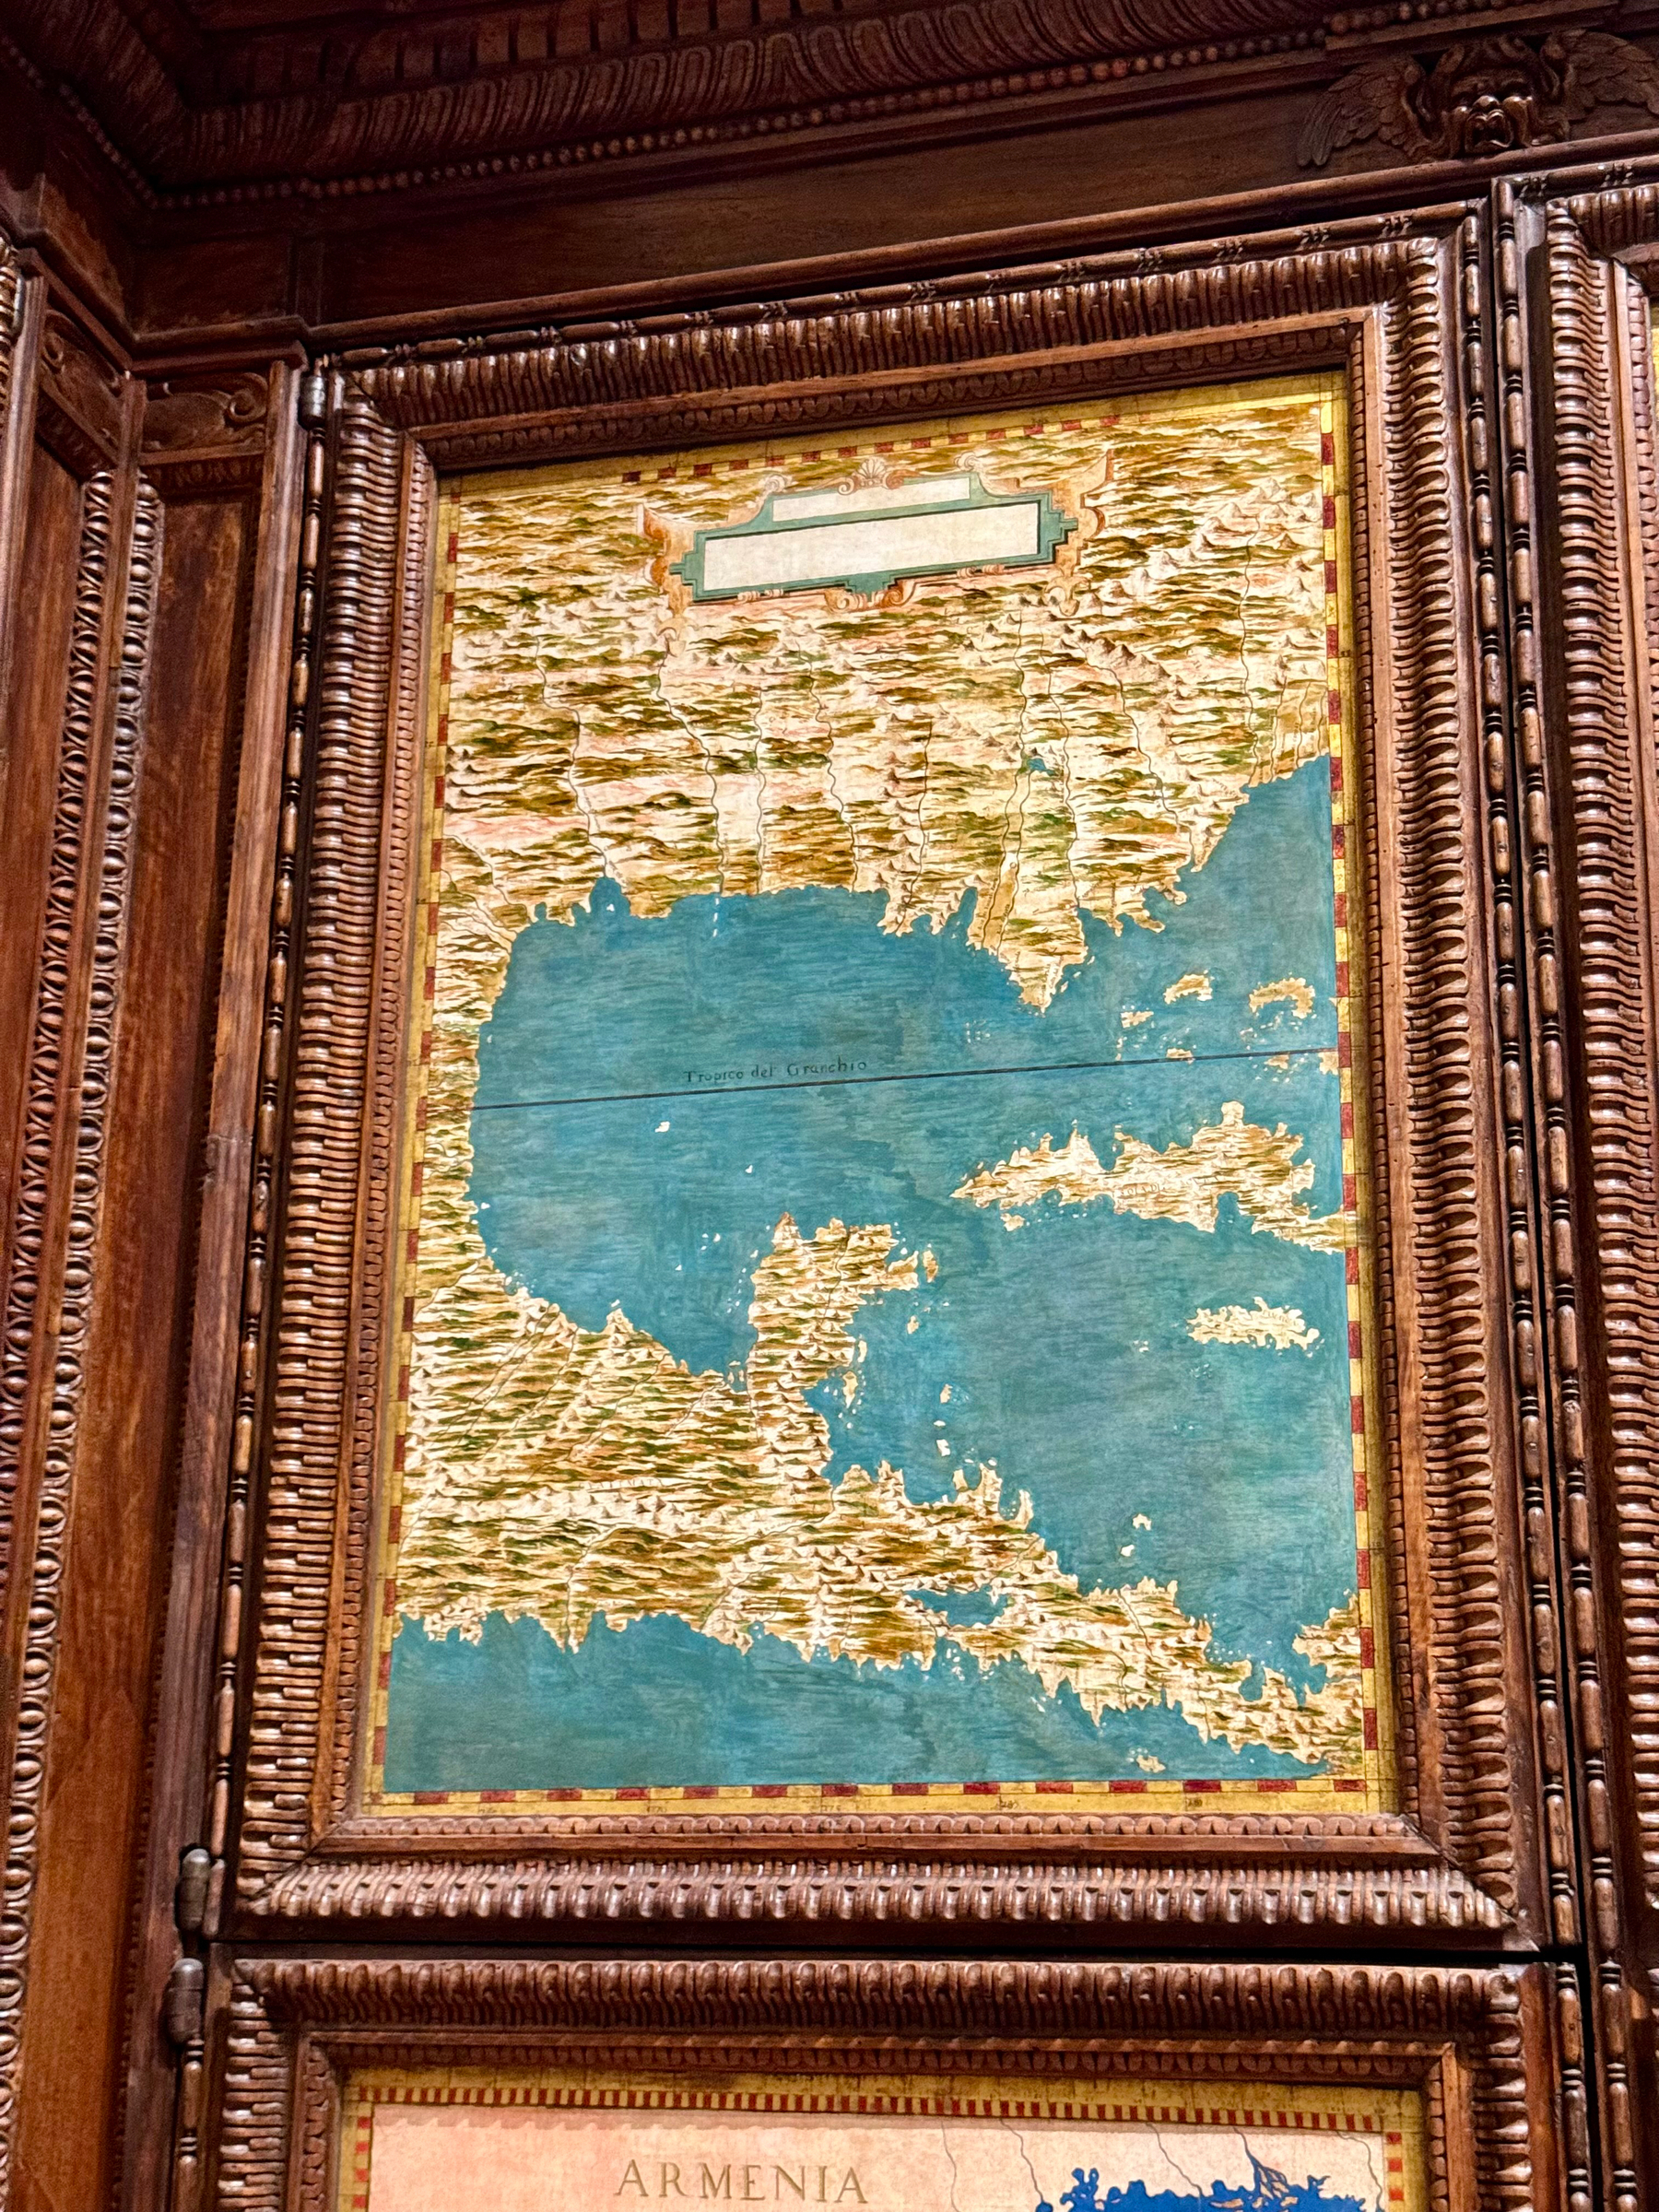 An old, framed map with an ornate wooden border showing a coastal region. The map is primarily in blue and gold with visible terrain details. The body of water is extensive with some islands scattered.